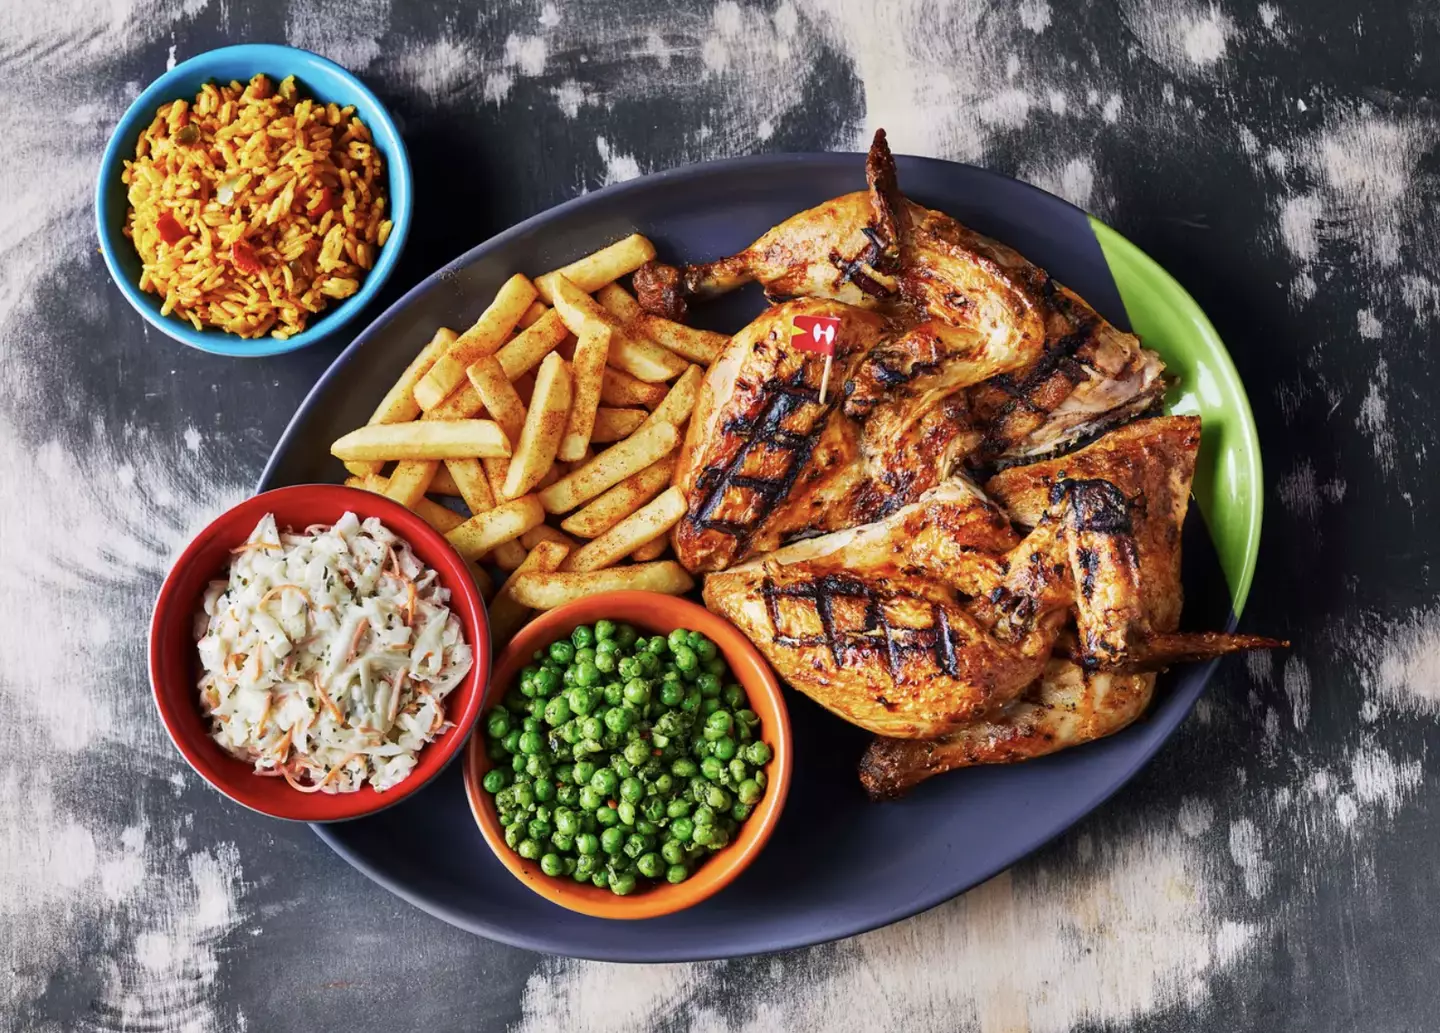 Who wouldn't love a free cheeky Nando's, eh?